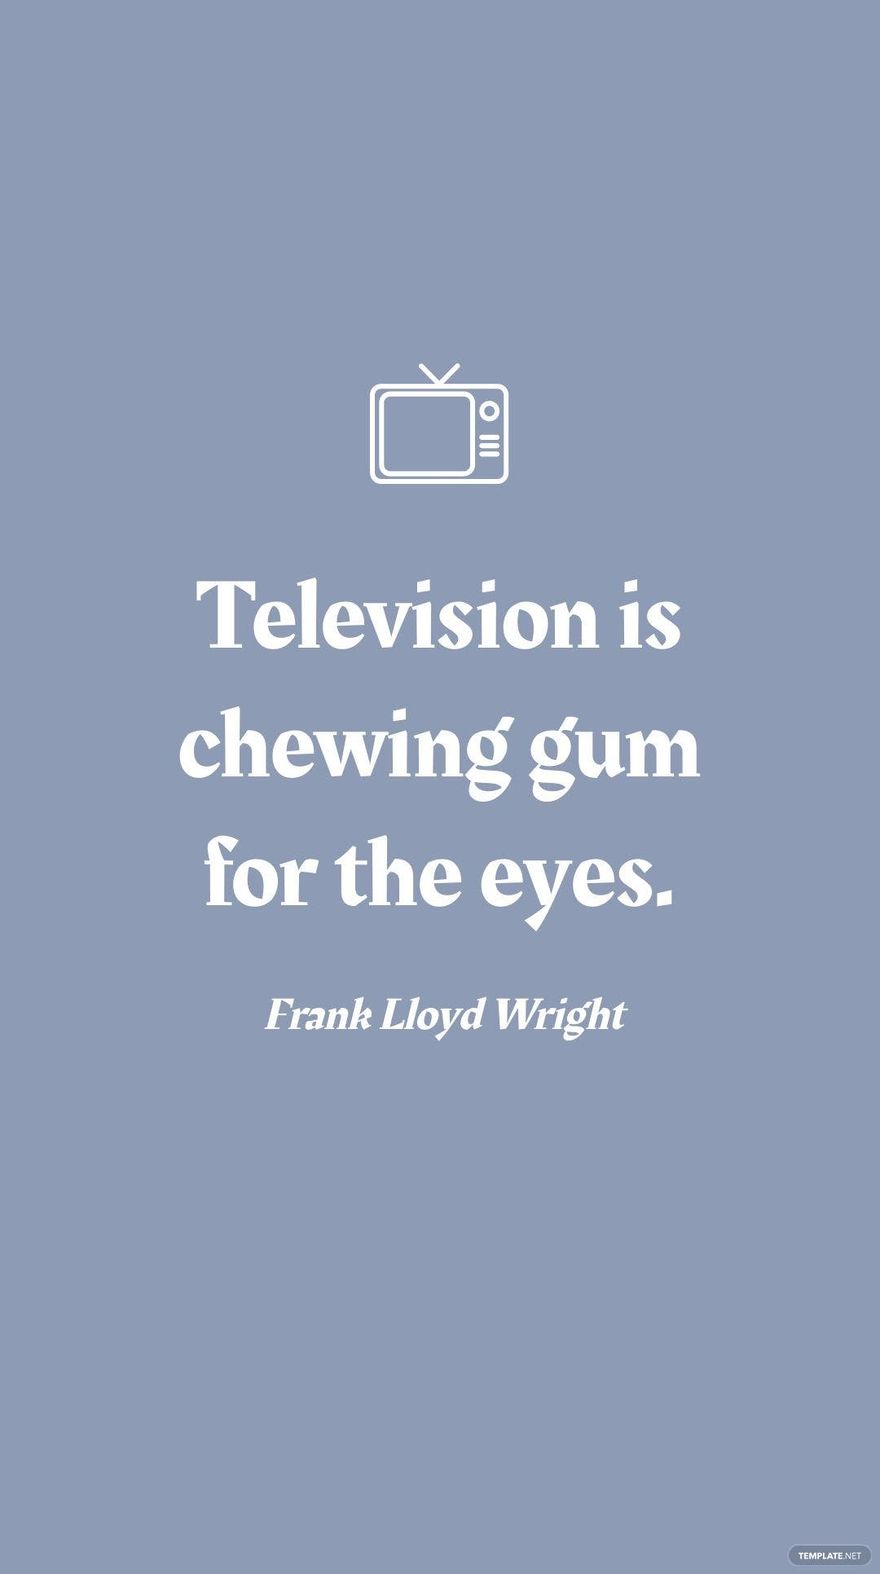 Frank Lloyd Wright - Television is chewing gum for the eyes. in JPG